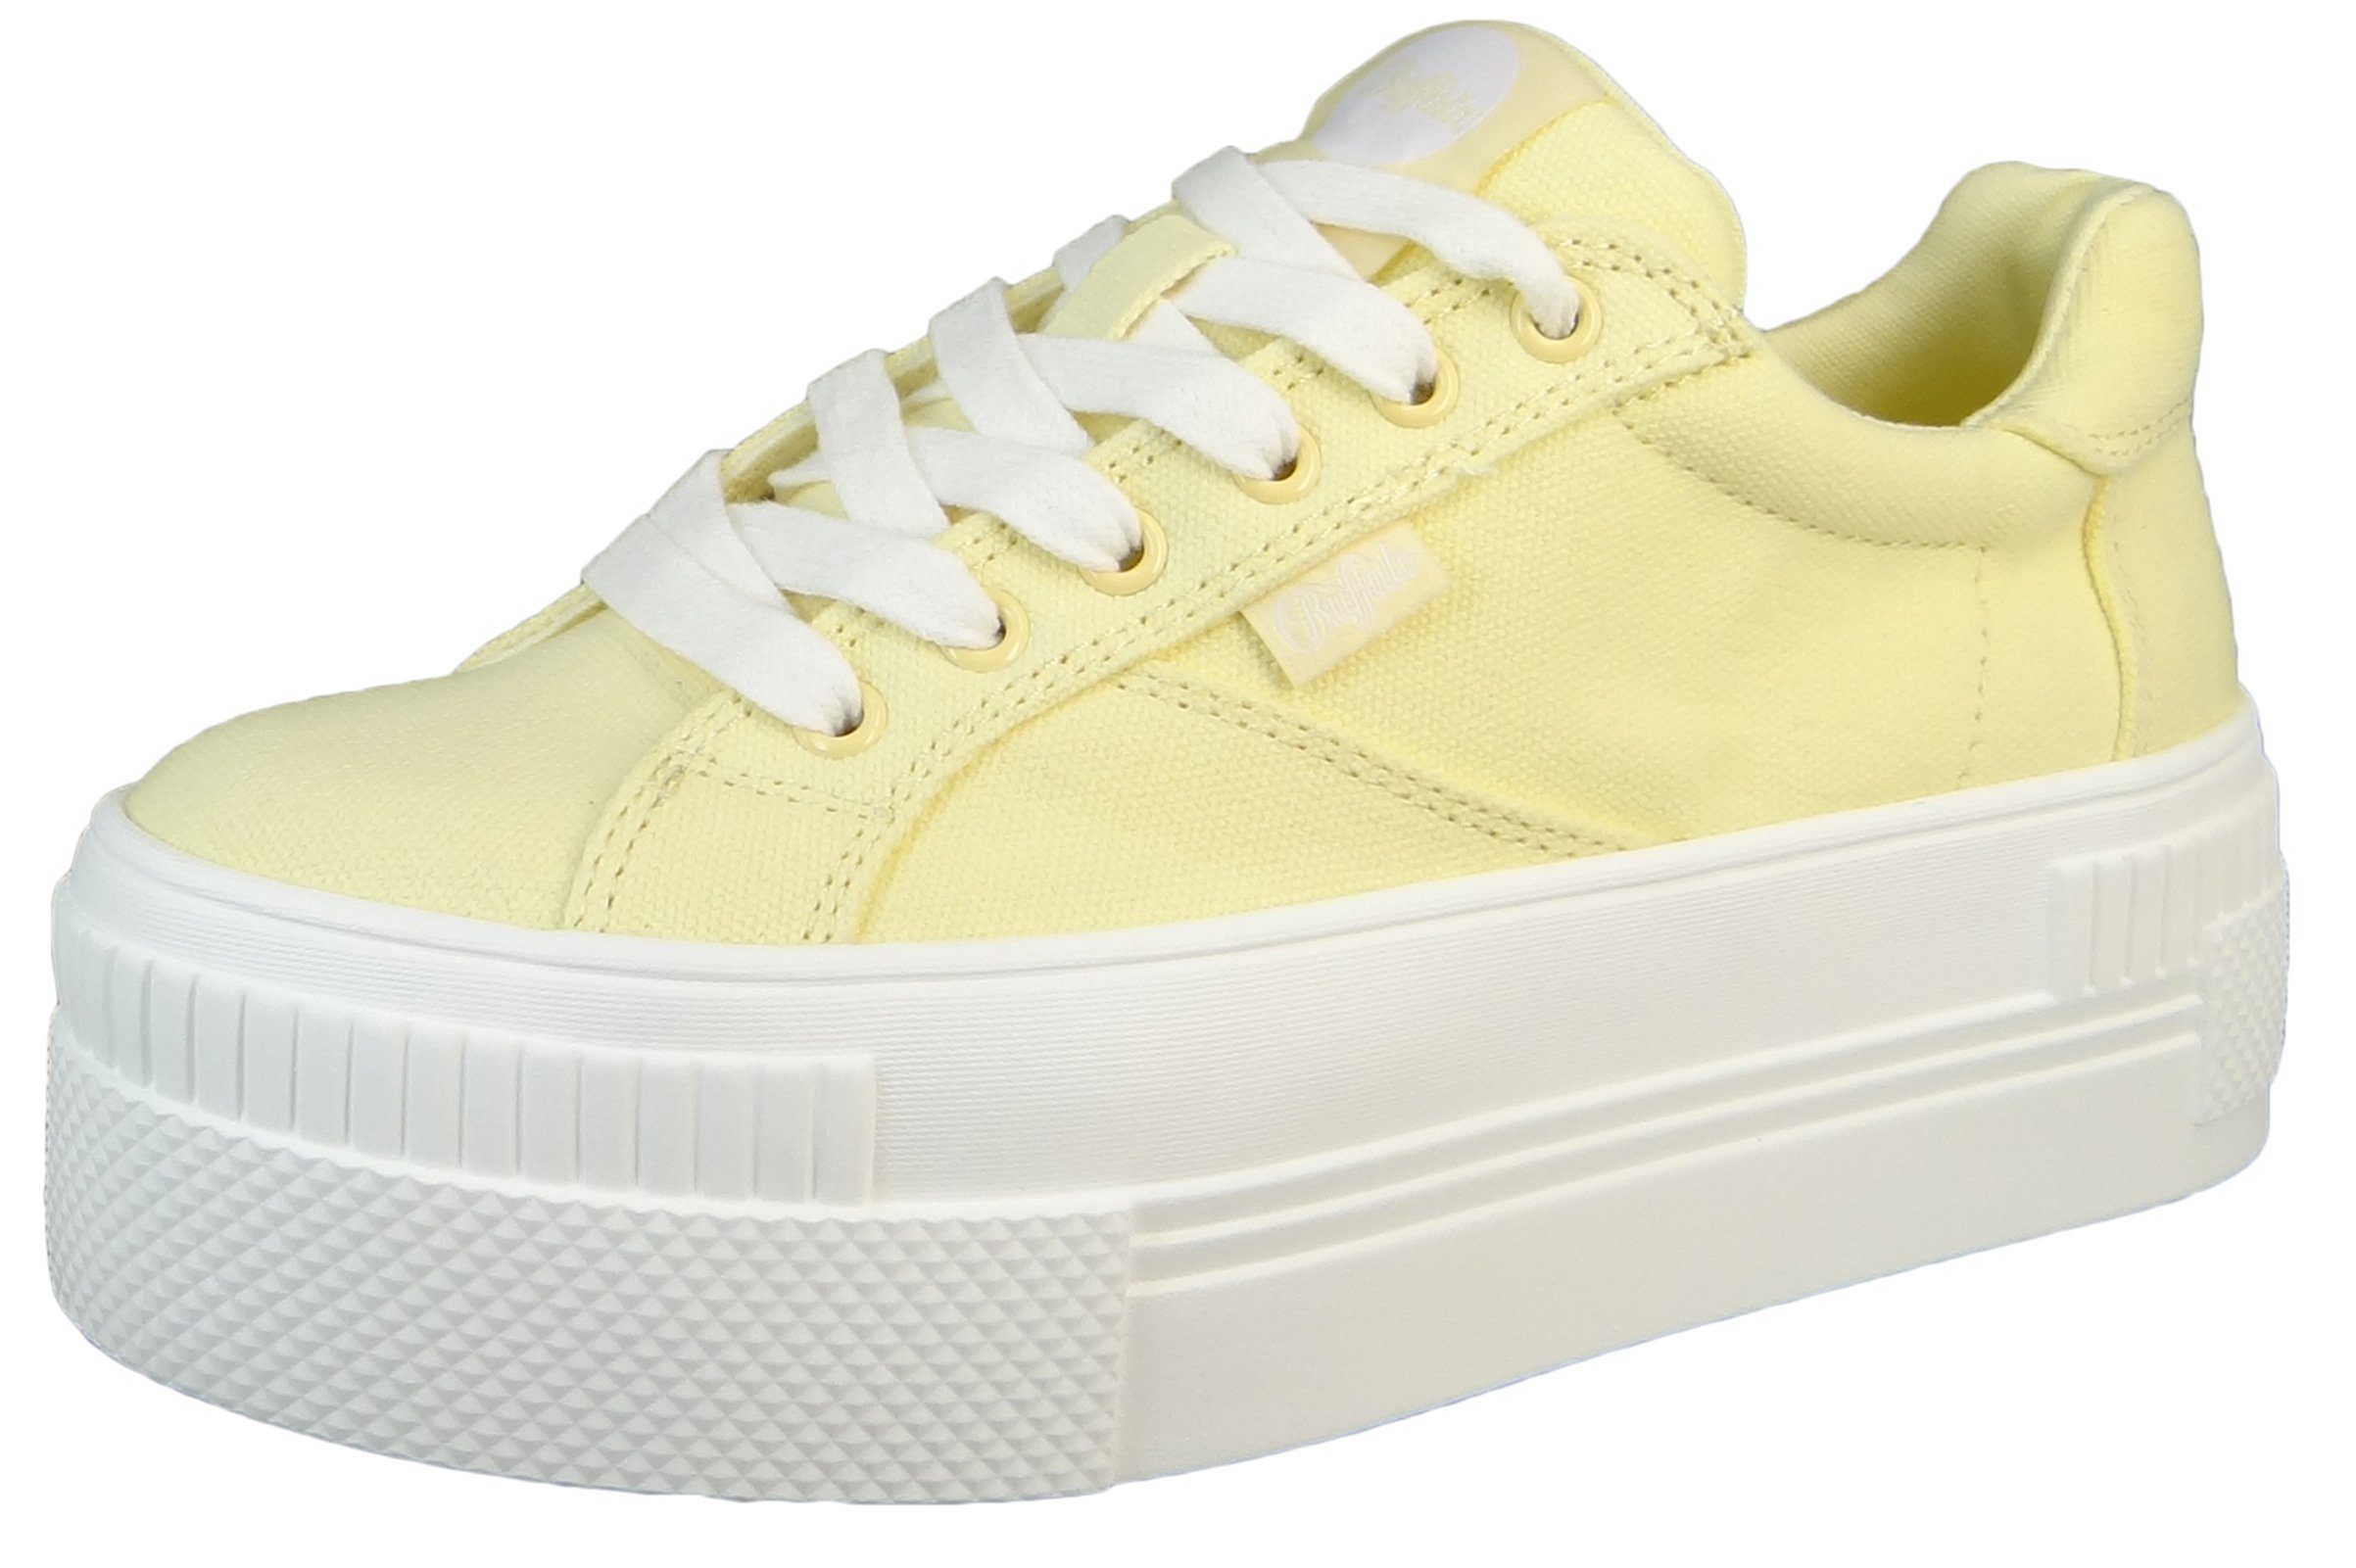 Buffalo 1630892 Paired Low Top Yellow Sneaker